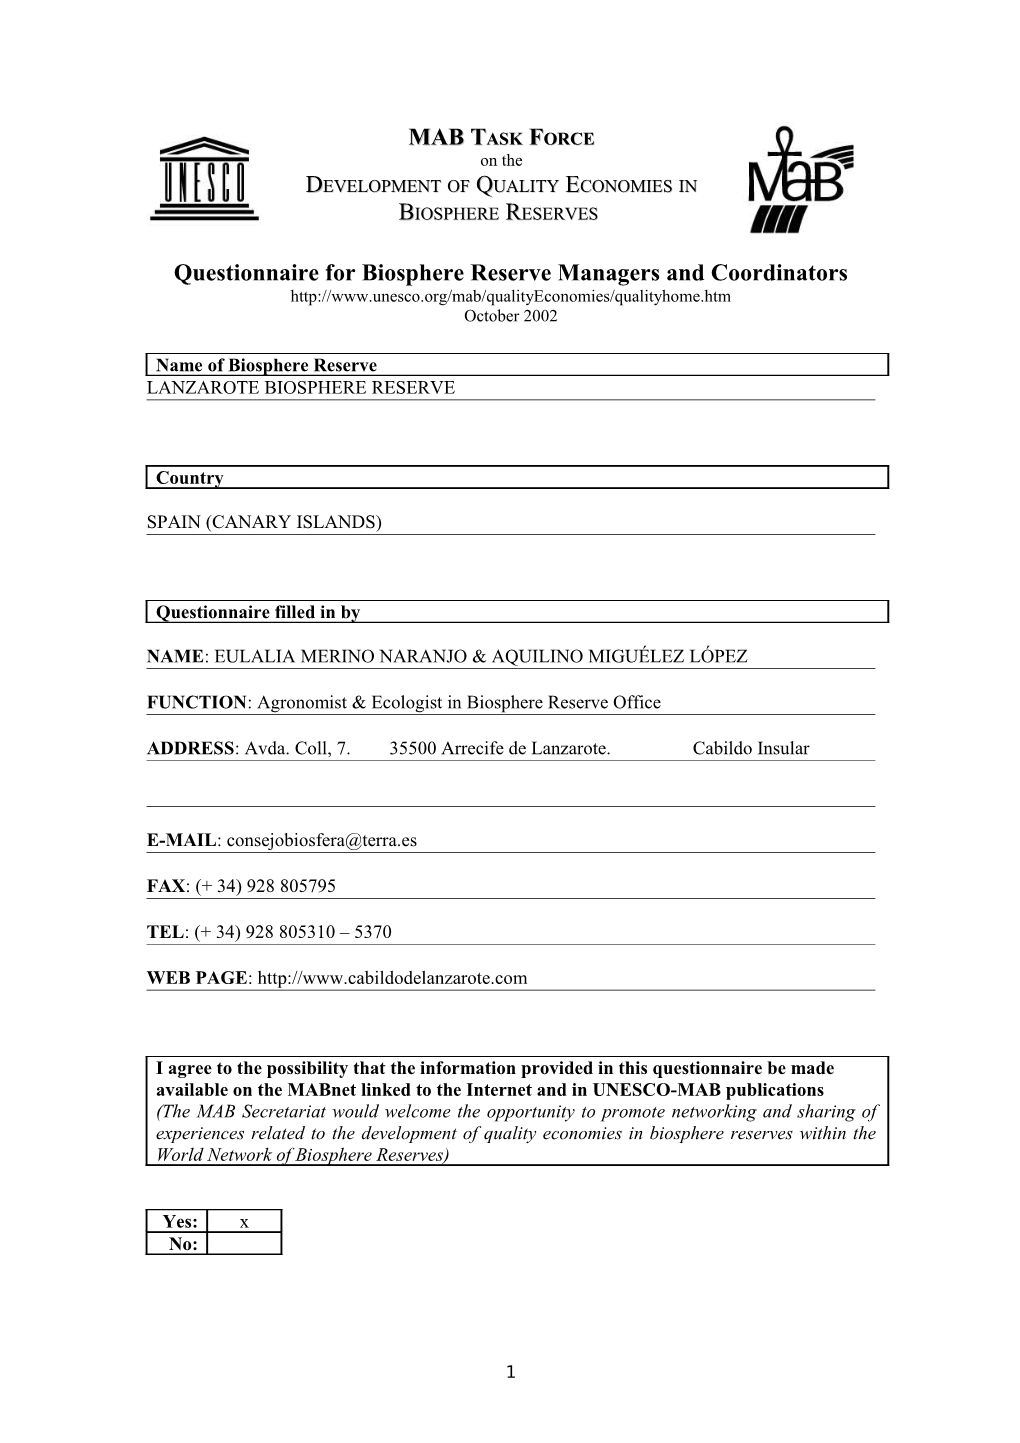 Questionnaire for Biosphere Reserve Managers and Coordinators